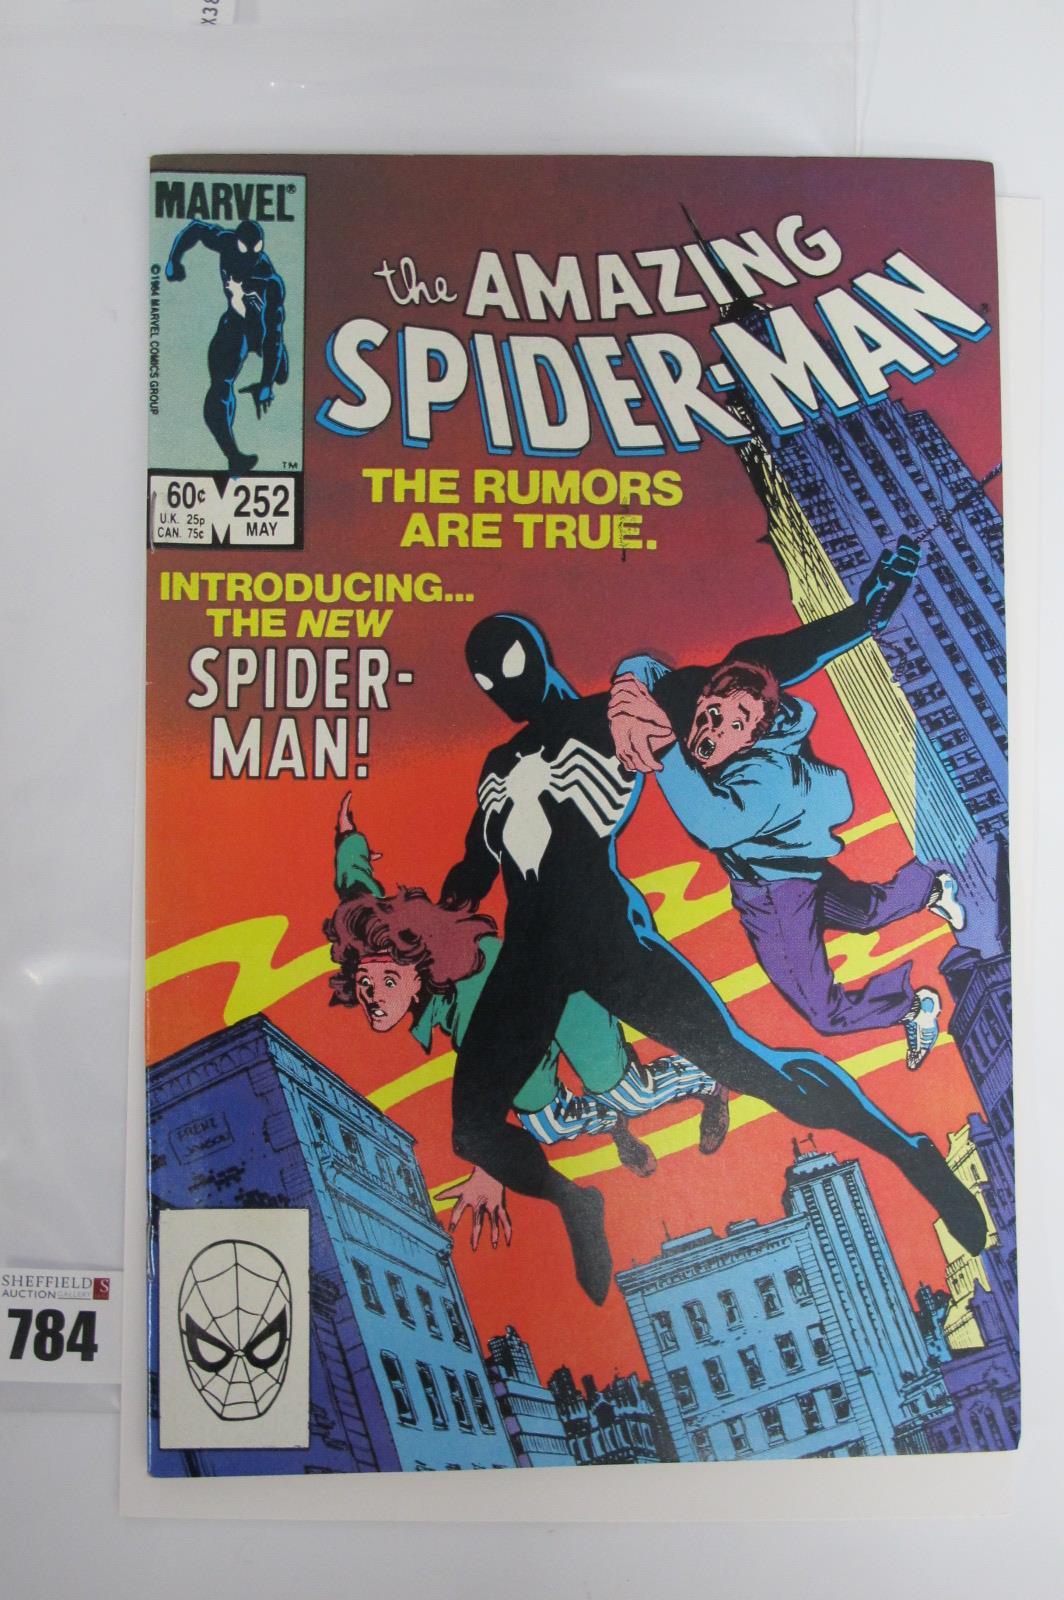 Amazing Spider Man #252 Marvel Comic, overall condition very good.